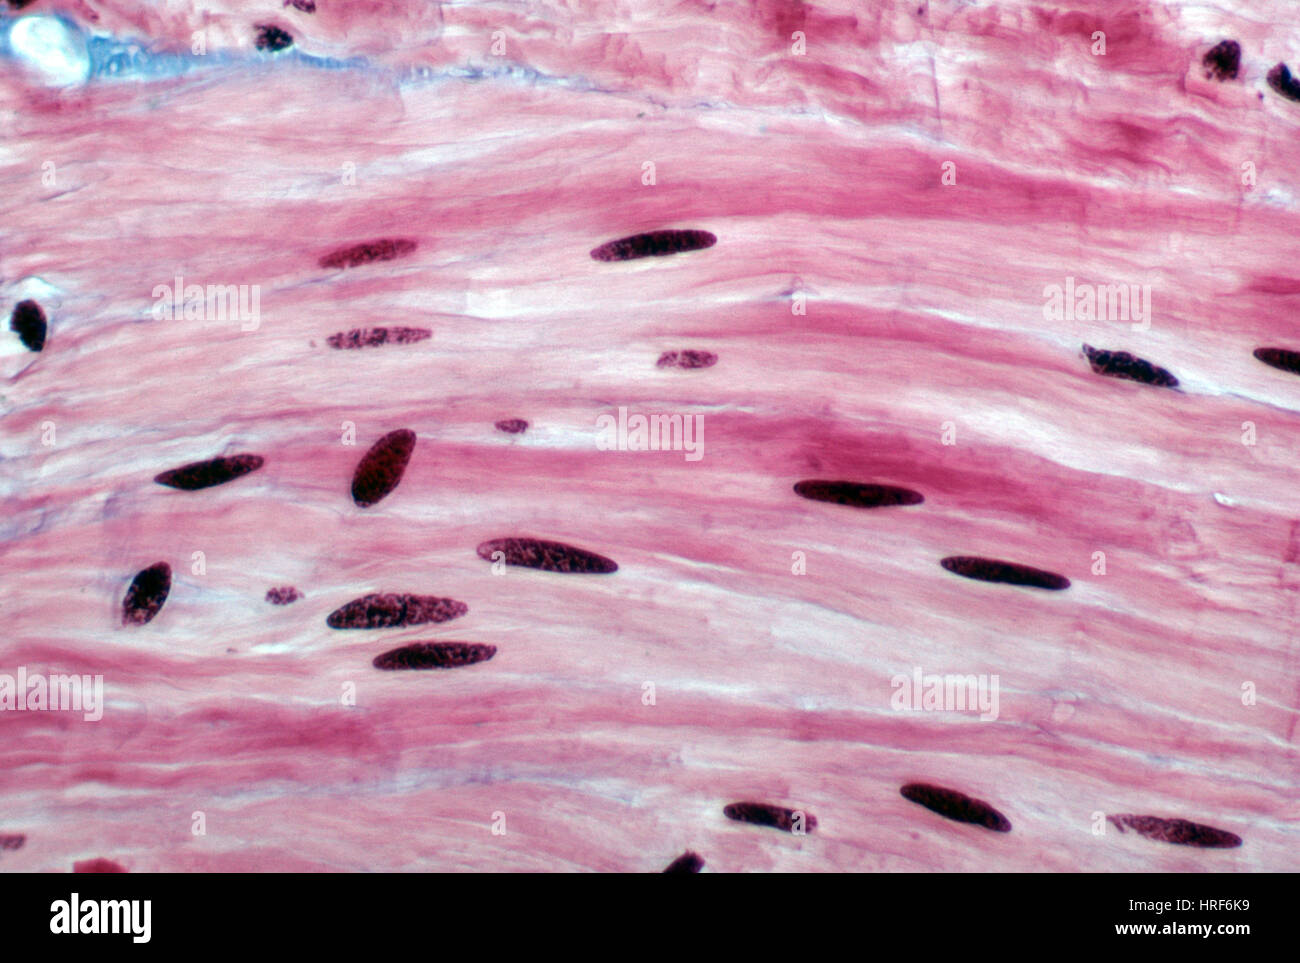 smooth muscle cells under microscope